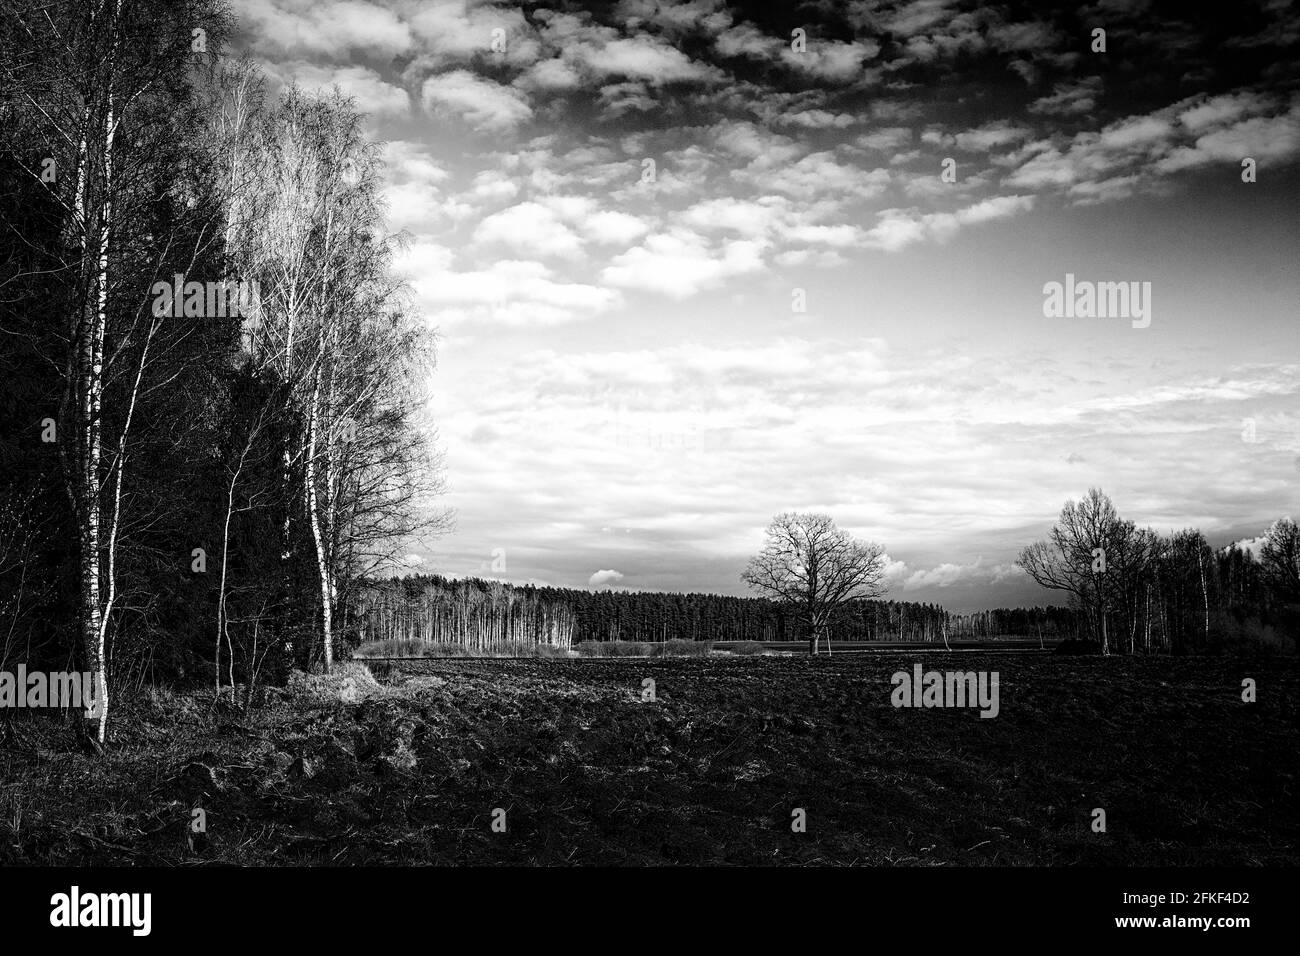 Field with green grass and trees in the distance in spring in sunny weather, blue sky with white clouds over the field. Black and white version. Stock Photo